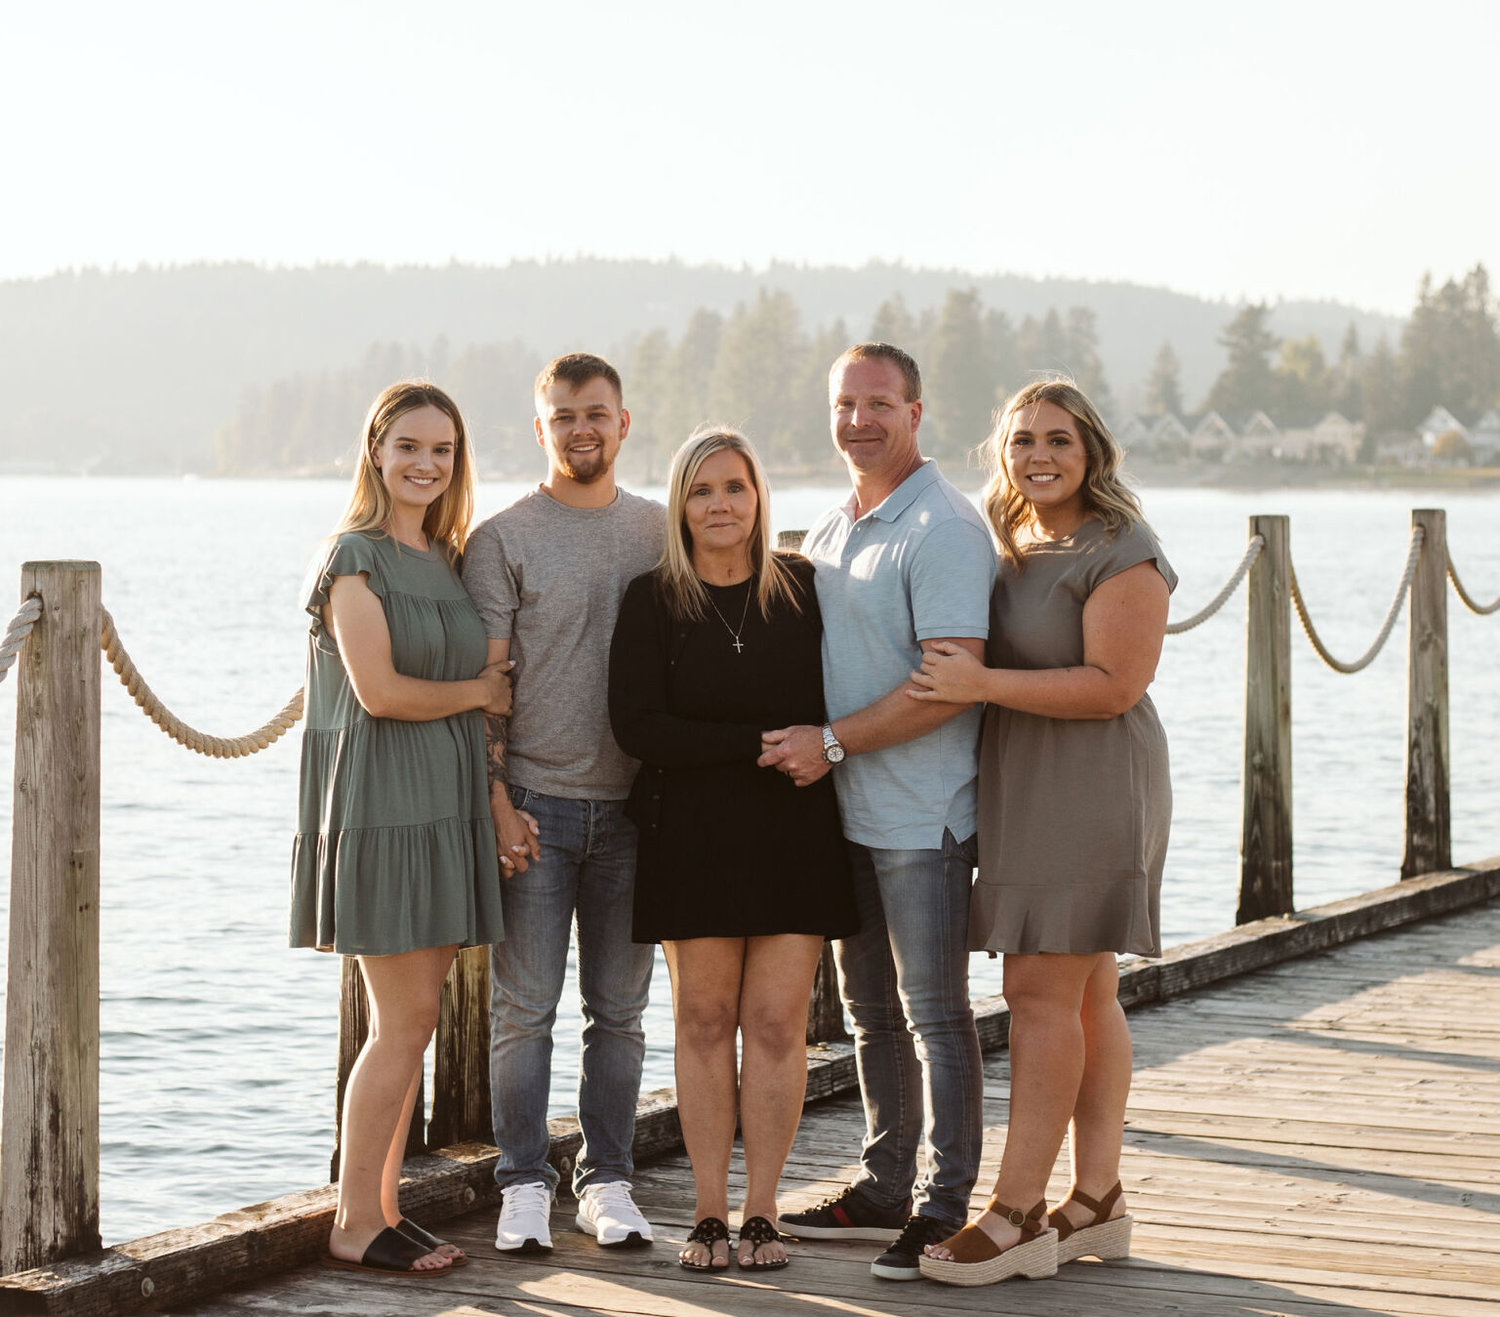 From left, Melynn Jorgensen, Franklin Taylor, Coralee Taylor, Chad Taylor and Amber Taylor pose for a family photograph.